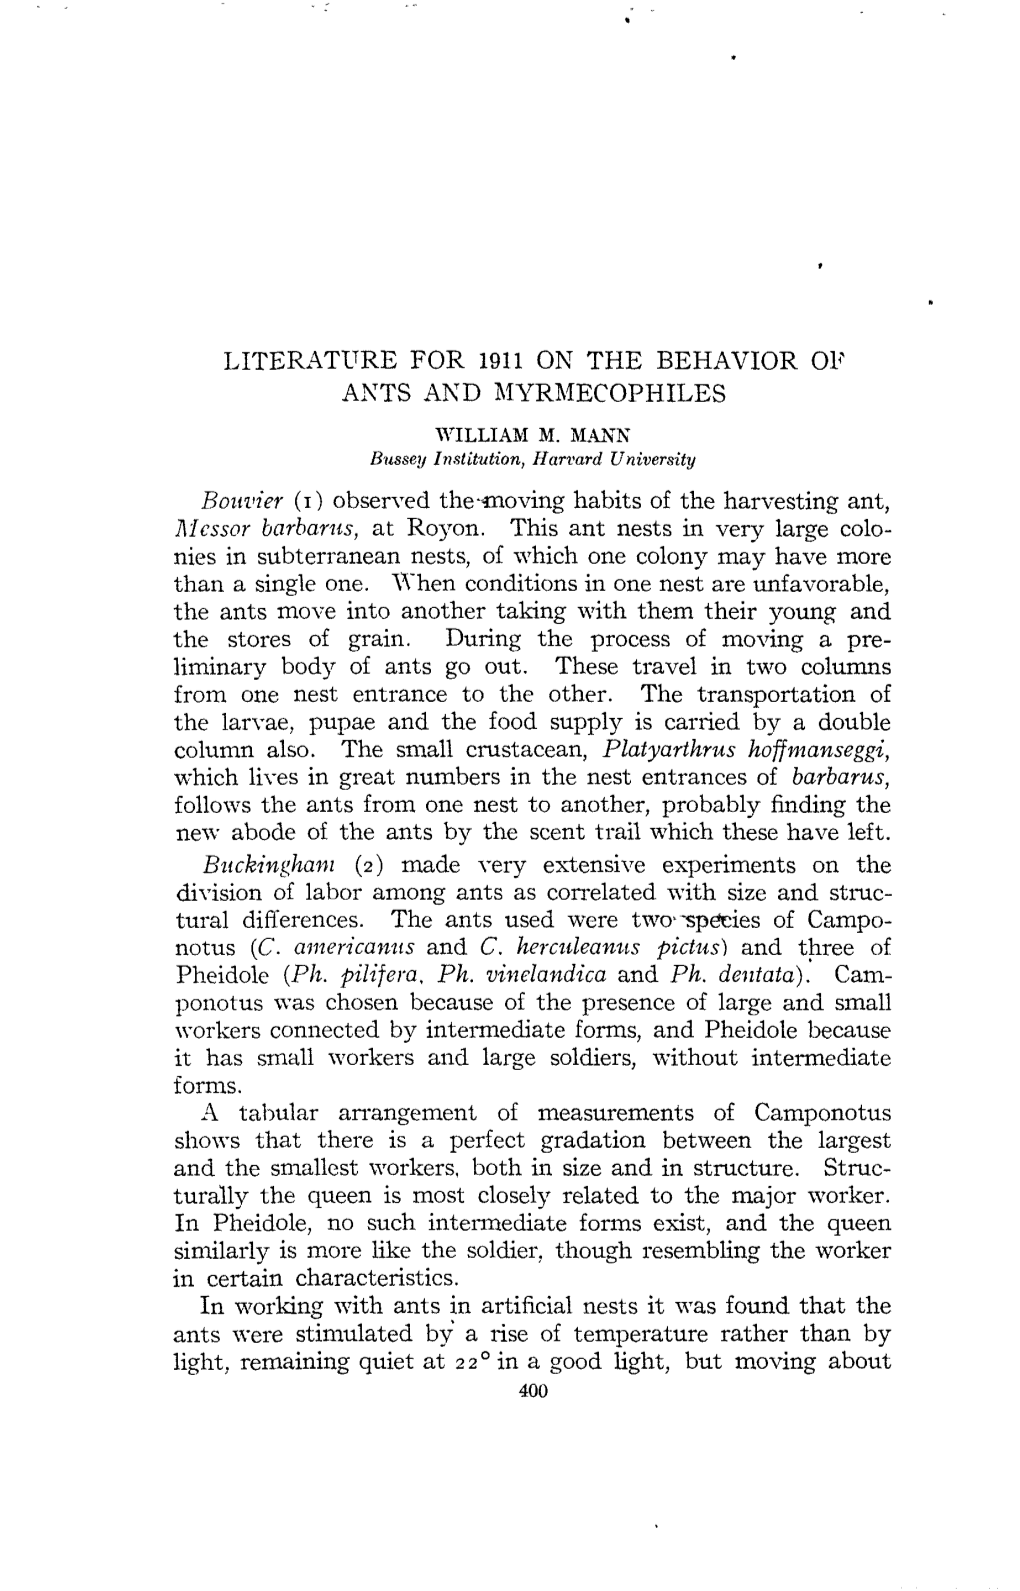 LITERATURE for 1911 on the BEHAVIOR of ANTS and MYRMECOPHILES Bouvier